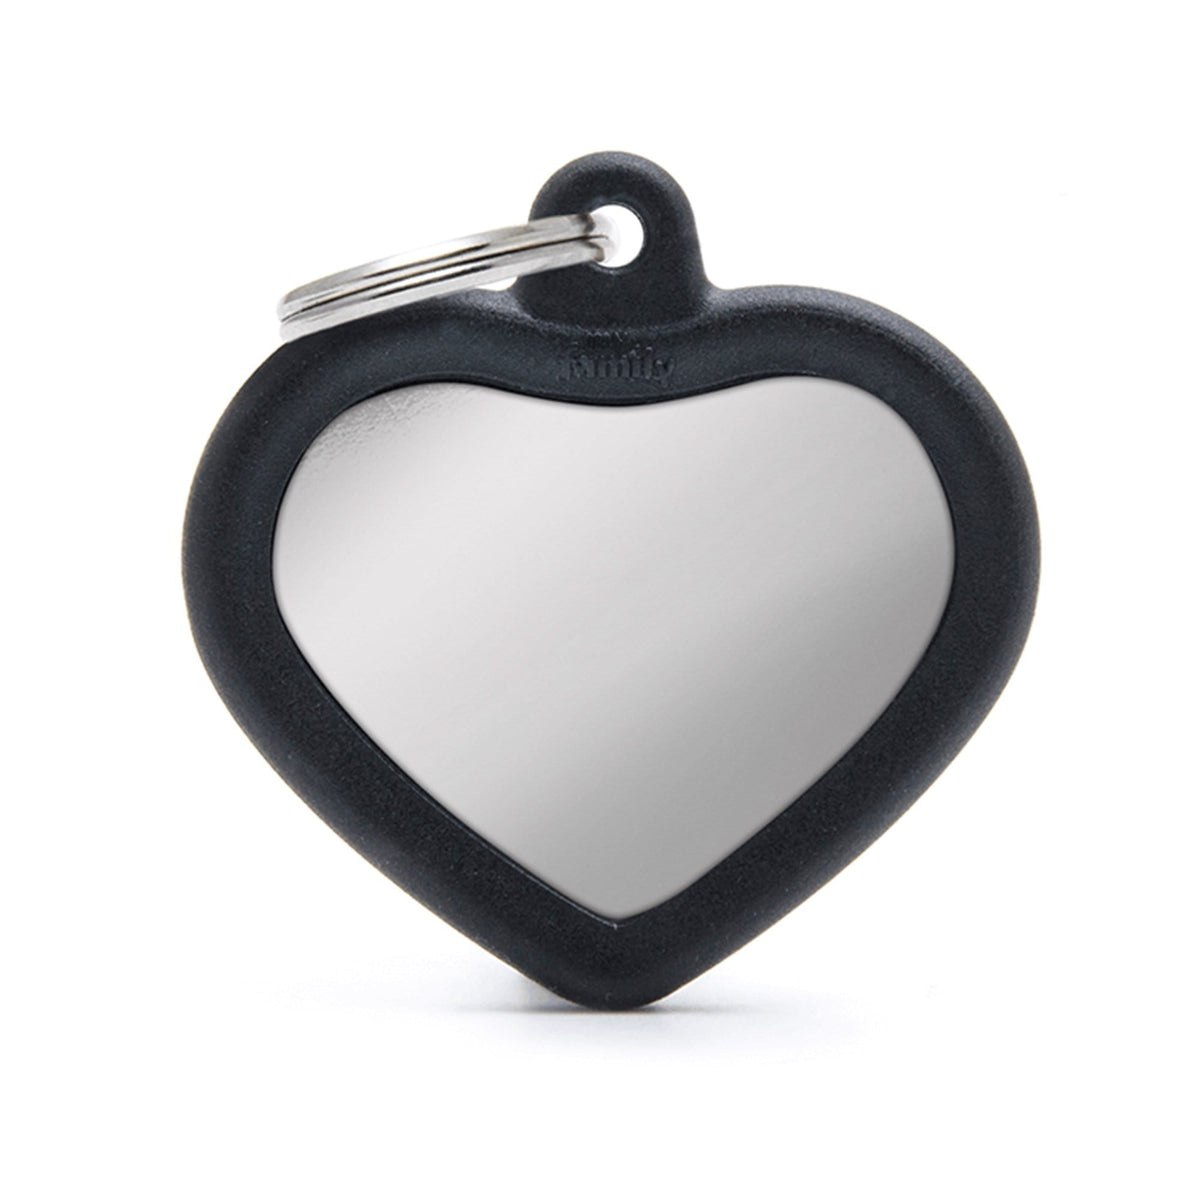 My Family Chromed Heart With Black Rubber Dog I.D. Tags 3F3B